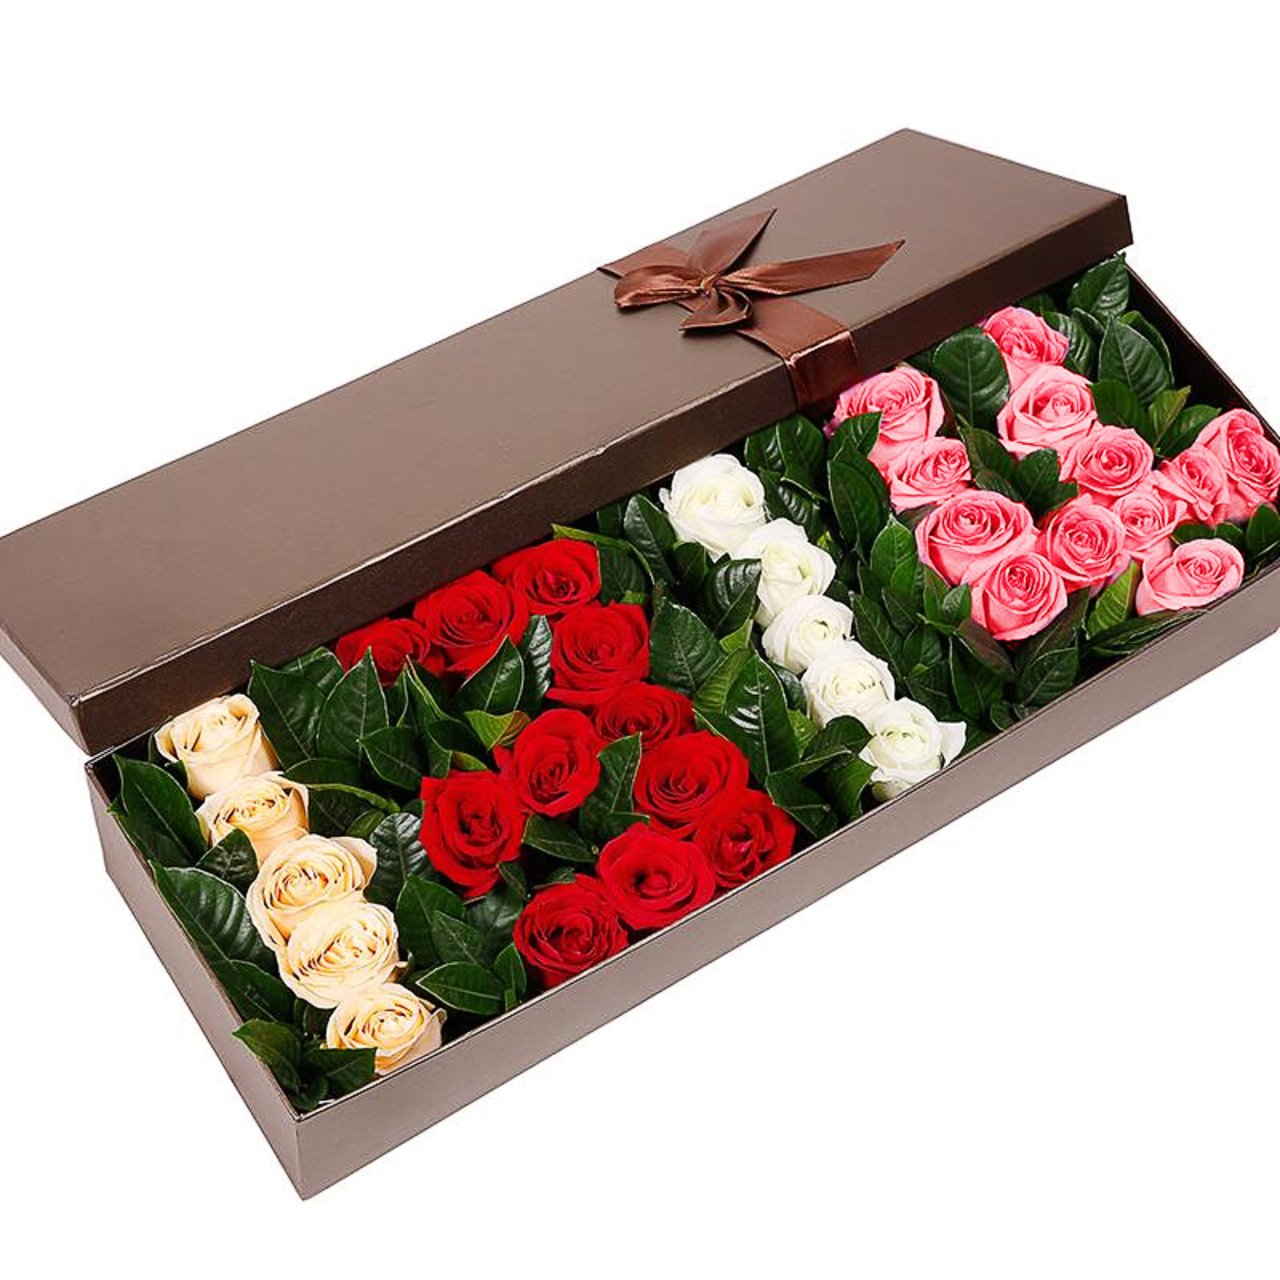 I am happy if you are happy(
36 mixed roses
-